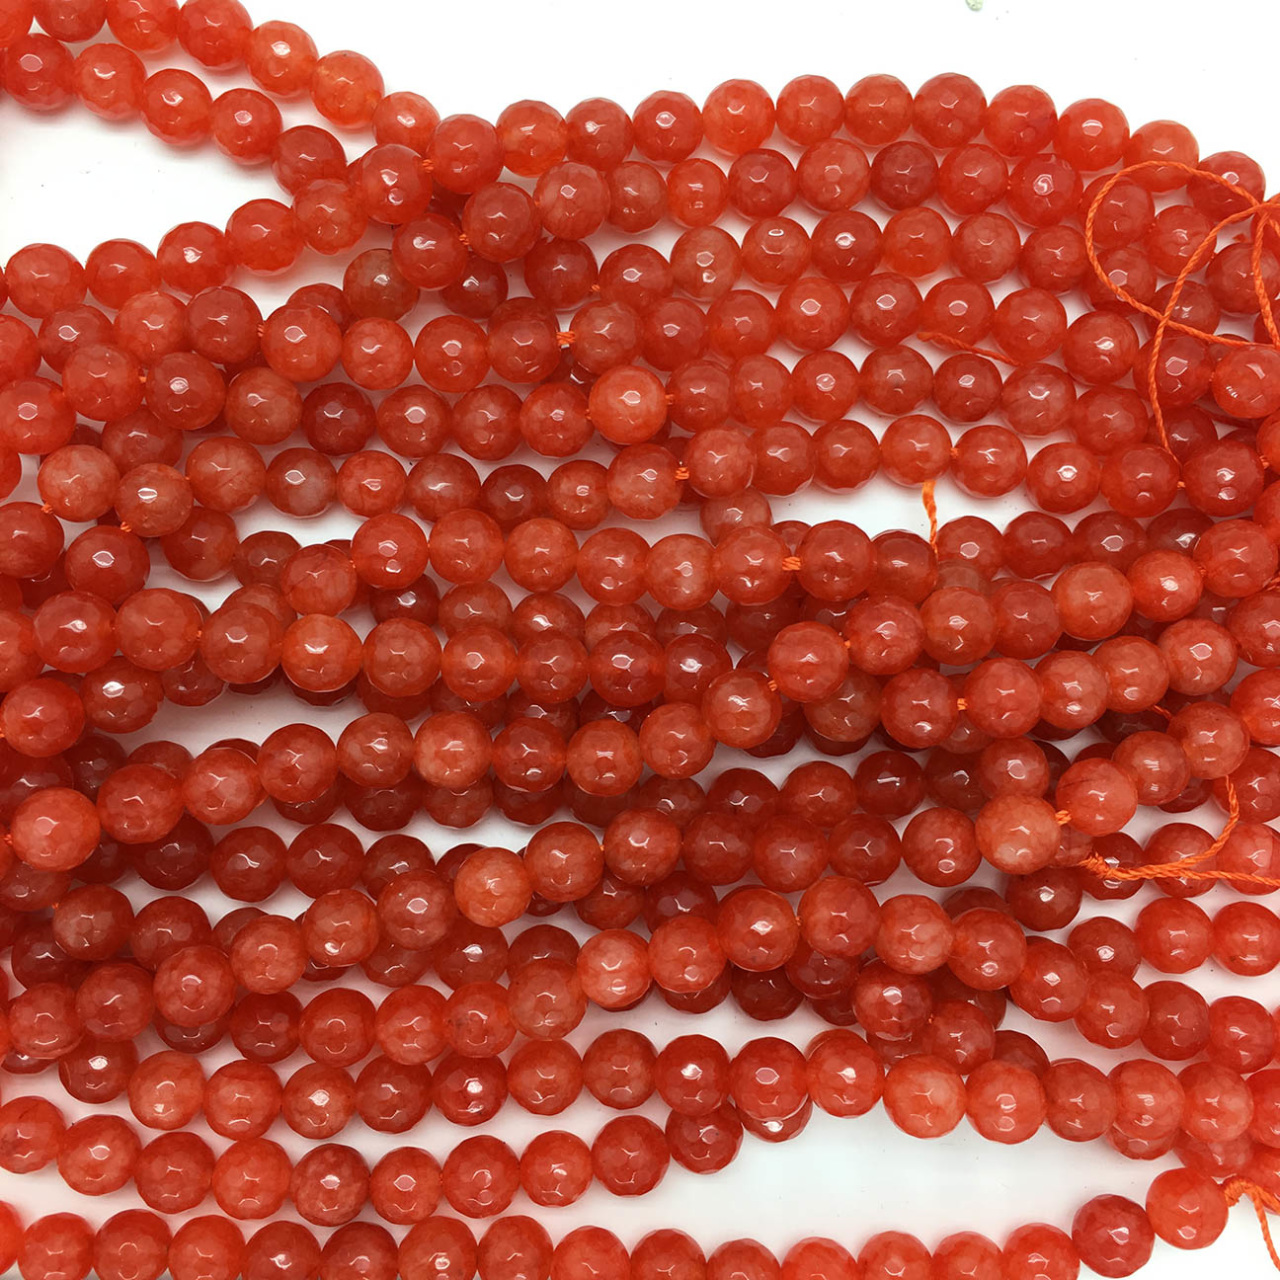 Round Beads - The Knotty Do-It-All Home